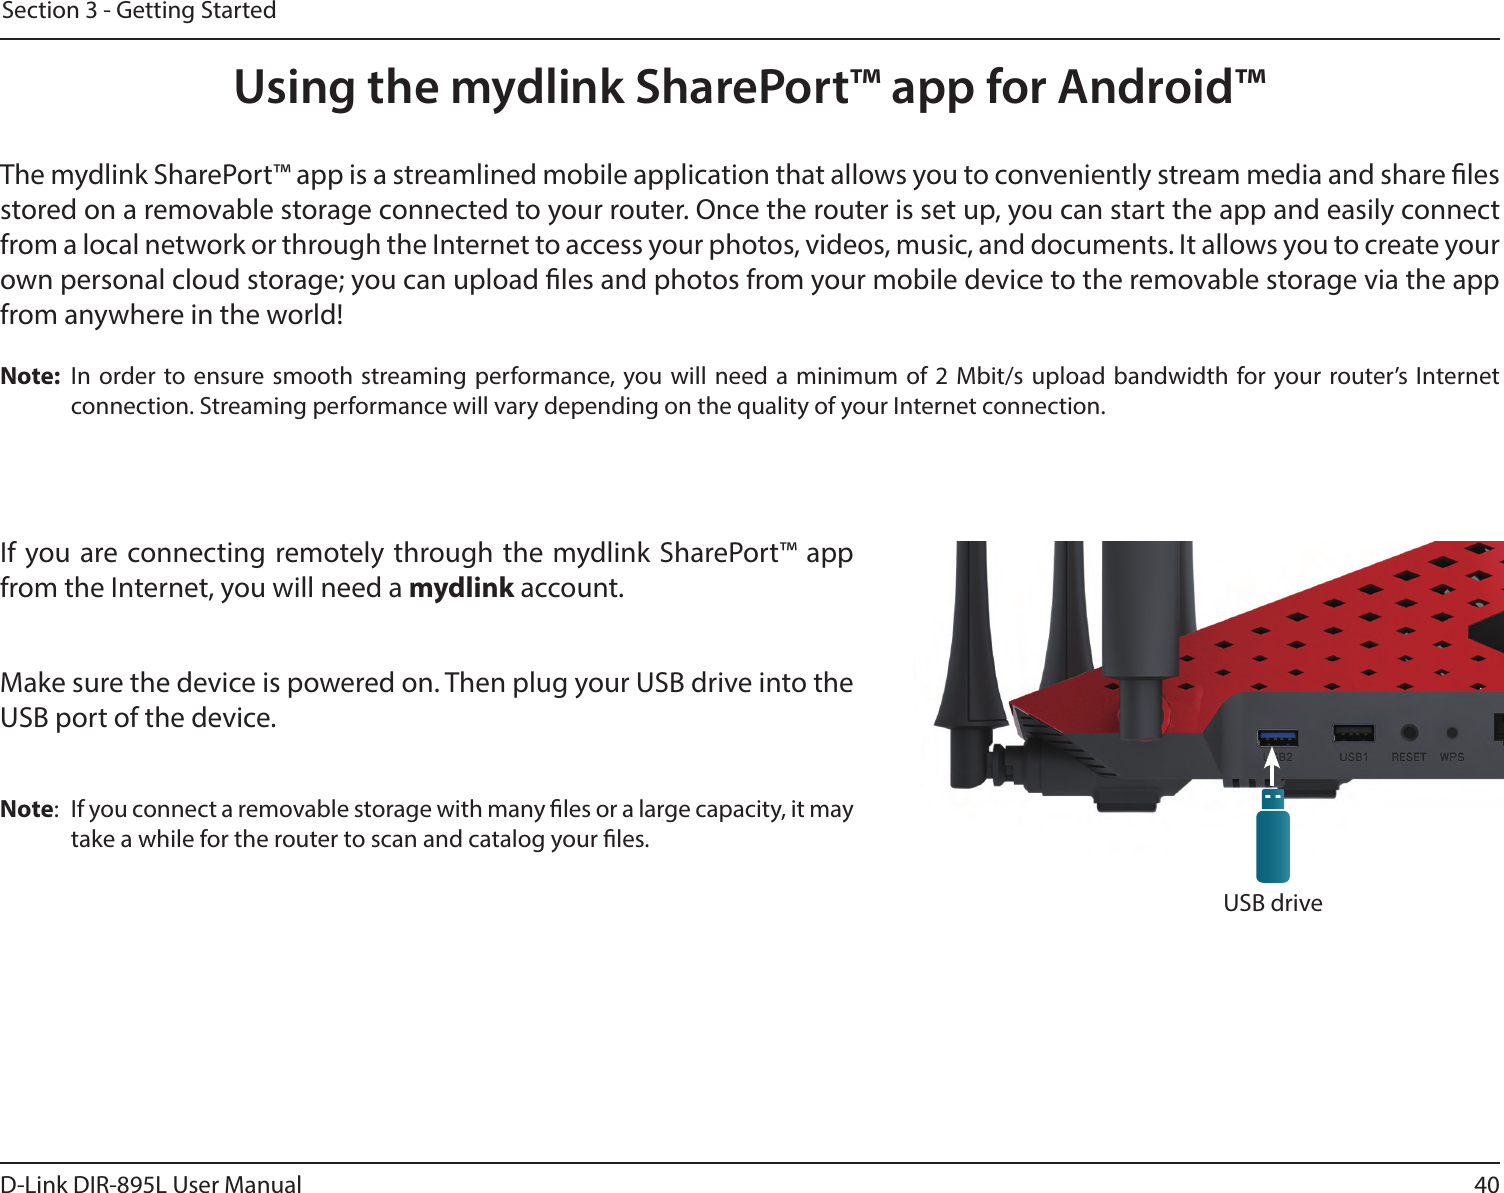 40D-Link DIR-895L User ManualSection 3 - Getting StartedUsing the mydlink SharePort™ app for Android™The mydlink SharePort™ app is a streamlined mobile application that allows you to conveniently stream media and share les stored on a removable storage connected to your router. Once the router is set up, you can start the app and easily connect from a local network or through the Internet to access your photos, videos, music, and documents. It allows you to create your own personal cloud storage; you can upload les and photos from your mobile device to the removable storage via the app from anywhere in the world!Note:  In order to ensure smooth streaming performance, you will need a minimum of 2 Mbit/s upload bandwidth for your router’s Internet connection. Streaming performance will vary depending on the quality of your Internet connection.If you are connecting remotely through the mydlink SharePort™ app from the Internet, you will need a mydlink account. Make sure the device is powered on. Then plug your USB drive into the USB port of the device.Note:  If you connect a removable storage with many les or a large capacity, it may take a while for the router to scan and catalog your les.USB drive